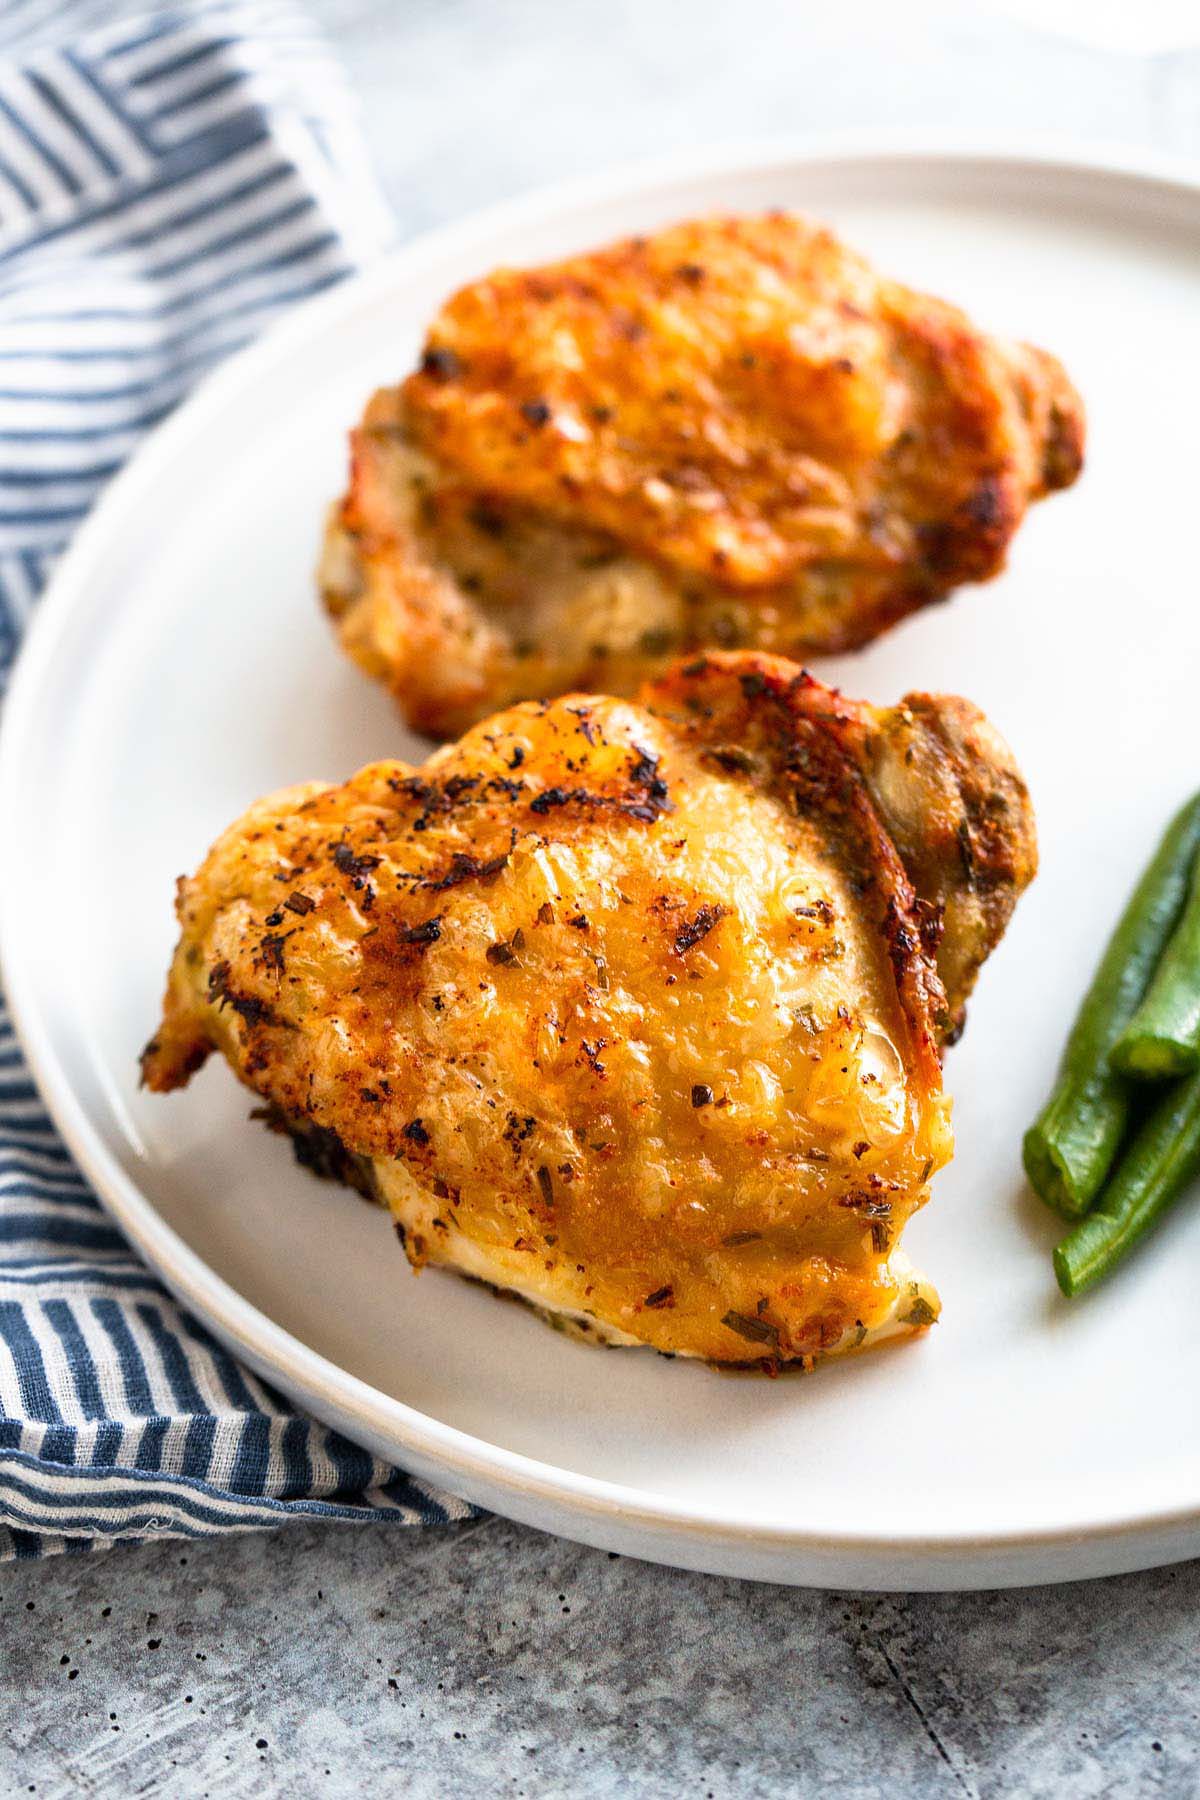 Crispy chicken thighs on a plate.